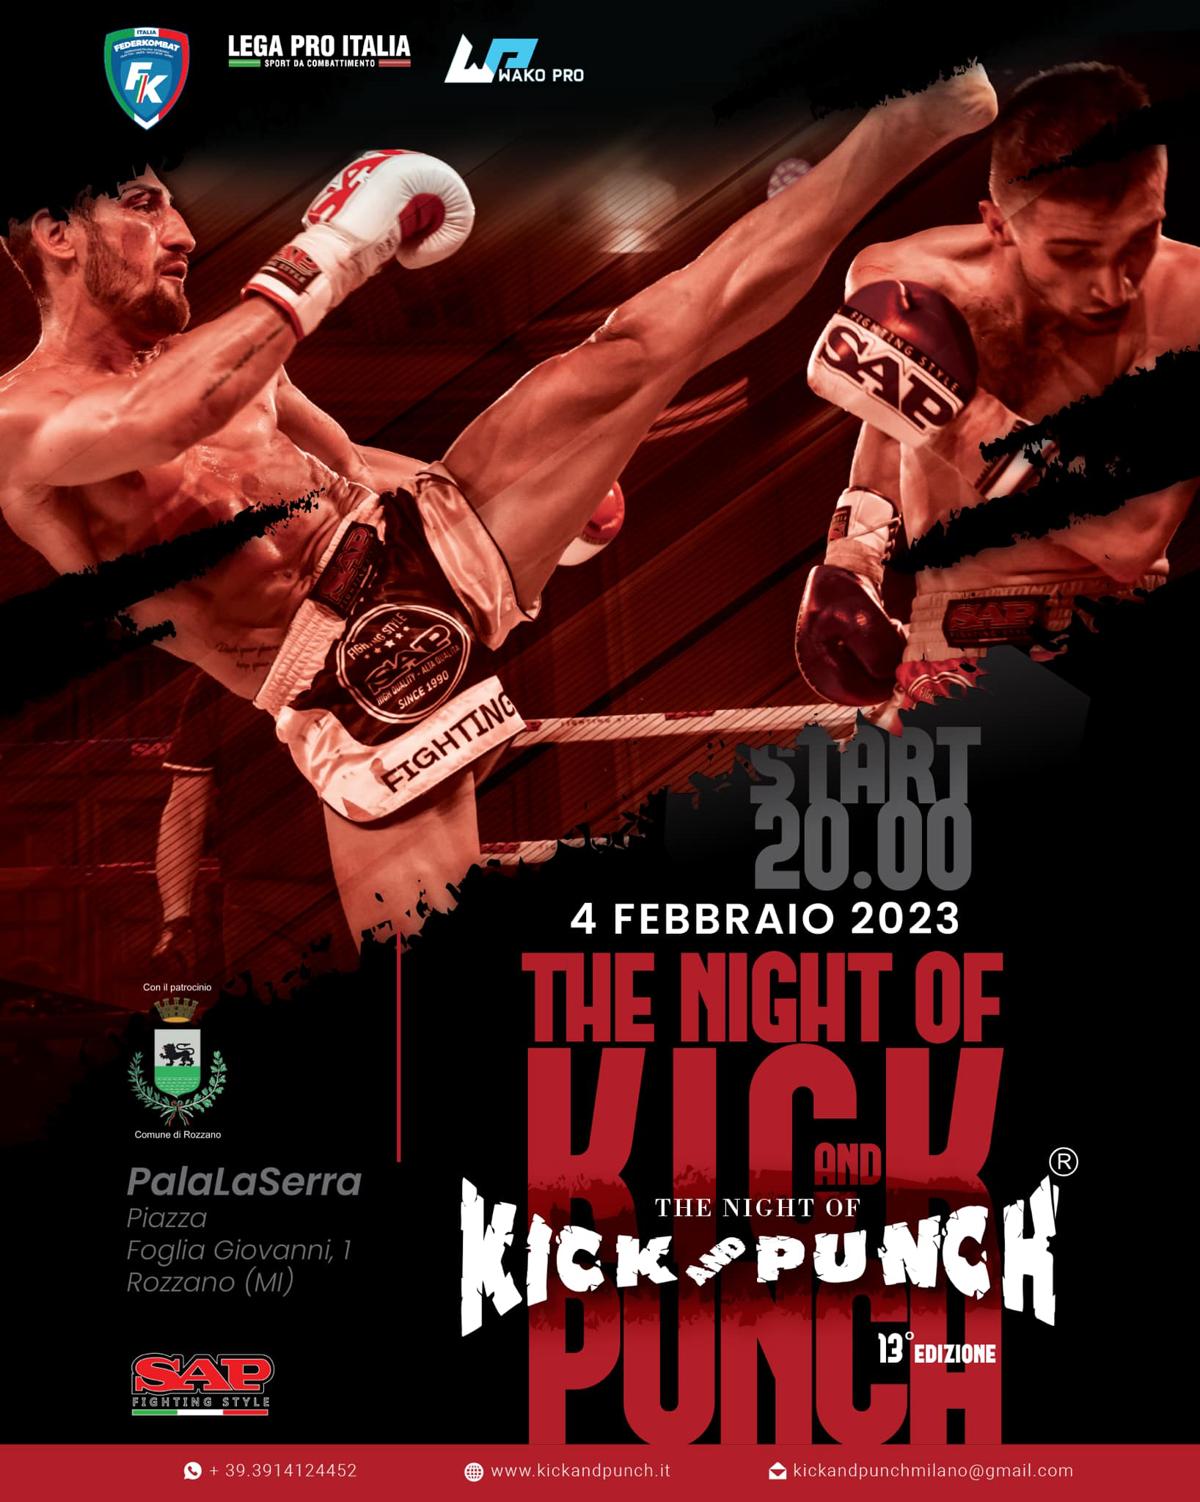 The Night of Kick and Punch 13